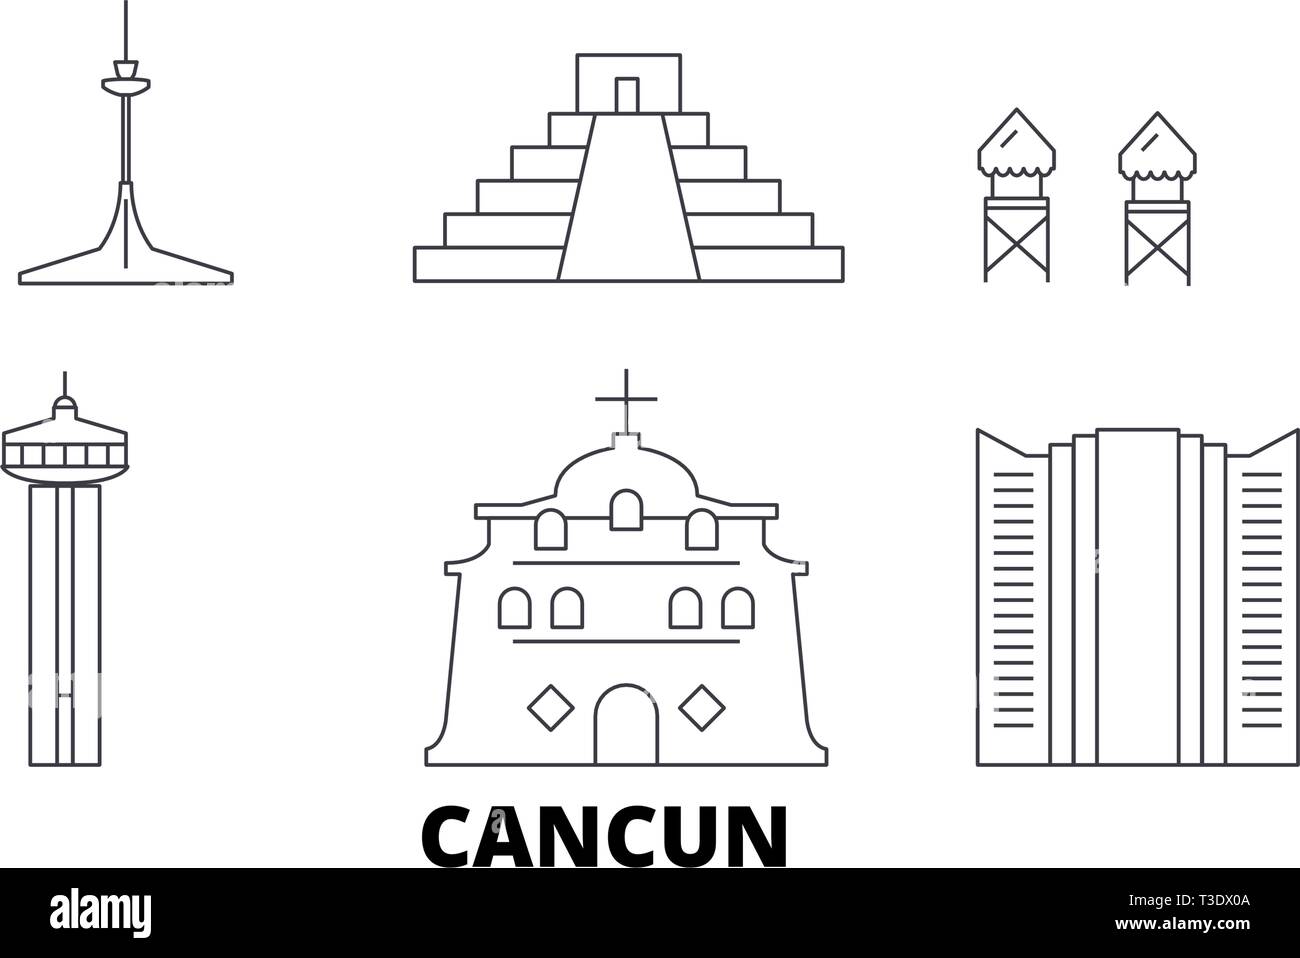 Mexico, Cancun line travel skyline set. Mexico, Cancun outline city vector illustration, symbol, travel sights, landmarks. Stock Vector